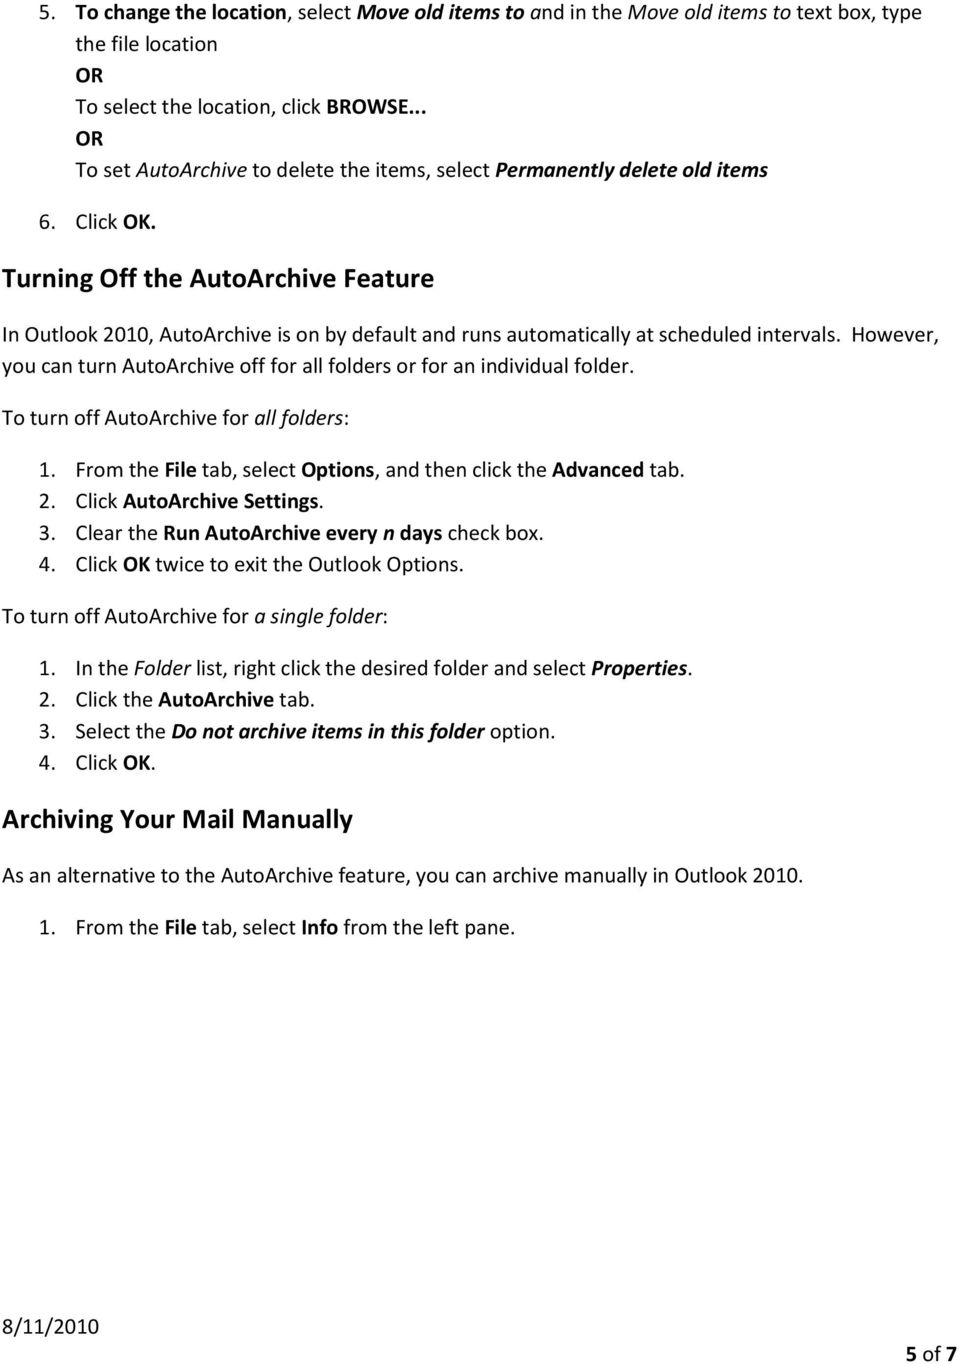 Turning the AutoArchive Feature In Outlook 2010, AutoArchive is on by default and runs automatically at scheduled intervals.